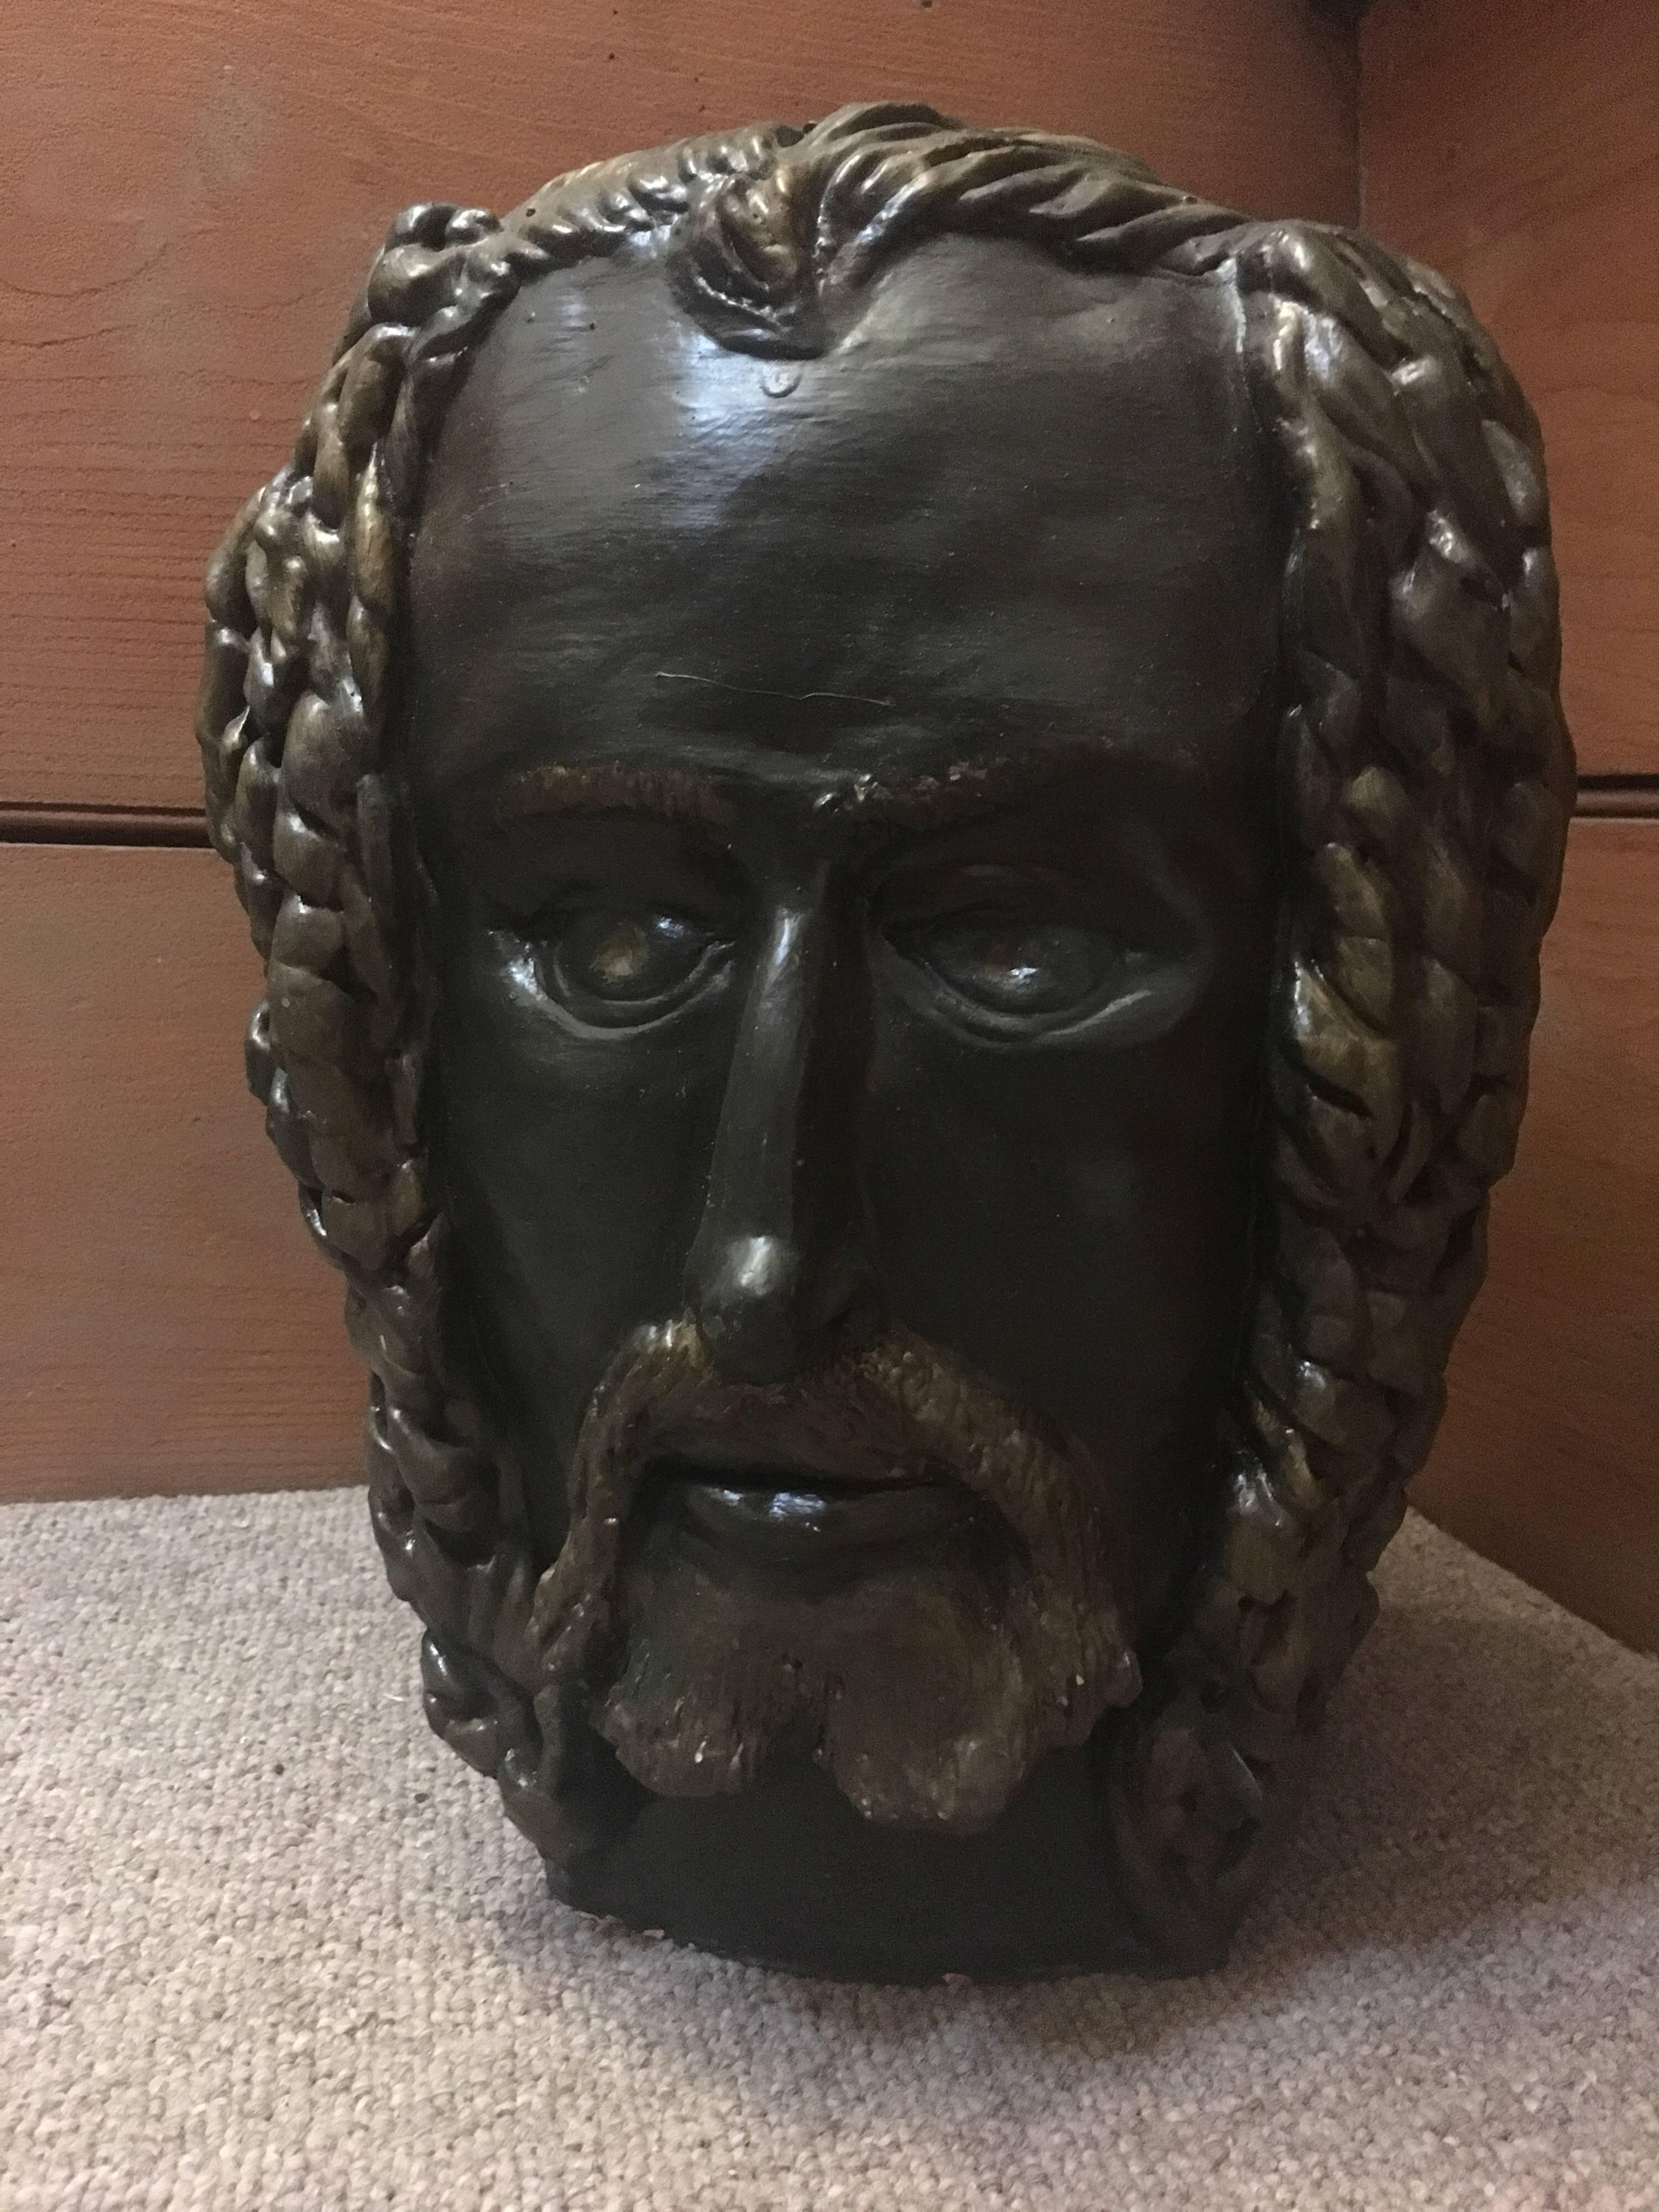 Head Sculpture Double Sided Man with Beard,
By French artist, Gabriel Jenny, Mid 20th Century
The artist has inscribed their initials near the bottom, please see images
Medium: clay/plaster
Size of the head approx: 13 x 9 inches

Intriguing